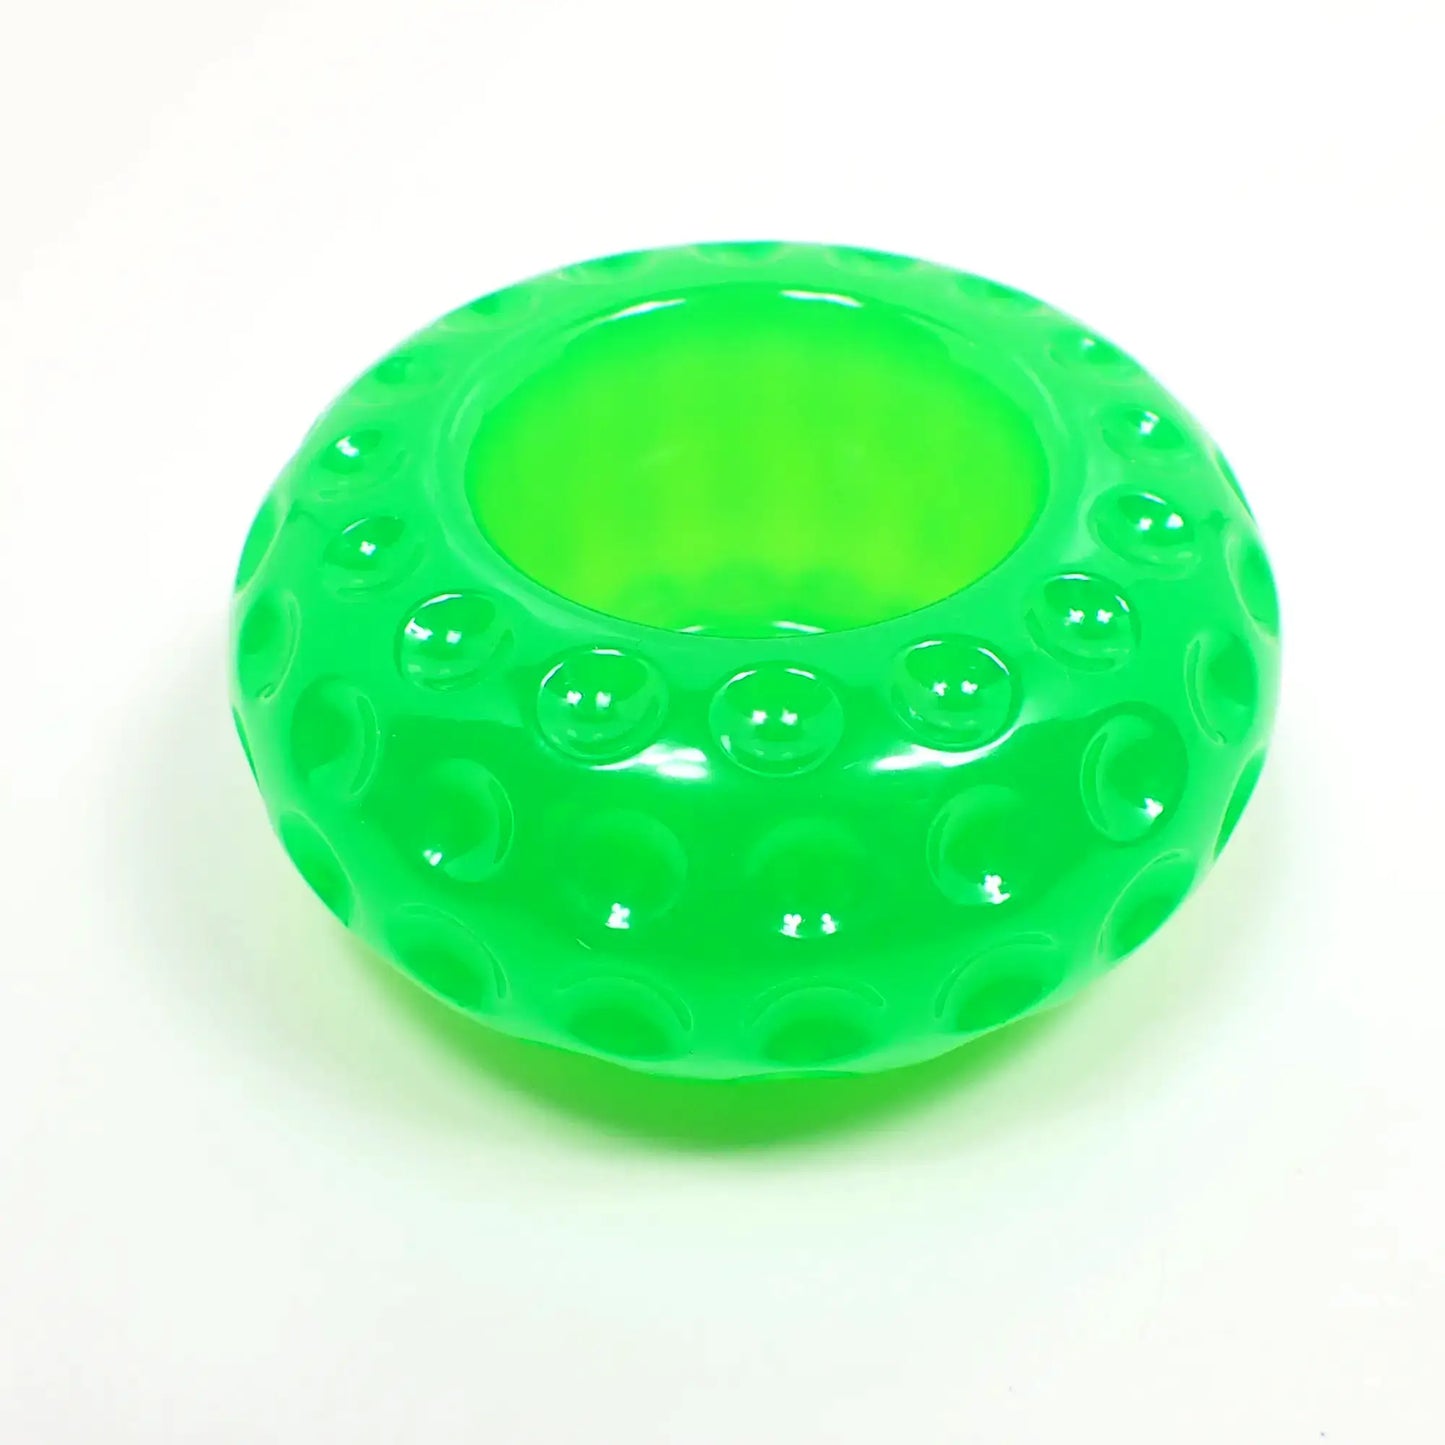 Small Handmade Bright Neon Green Resin Flameless Tea Light Candle Holder, Decorative Bowl, Puffy Rondelle Shaped with Indented Dot Pattern